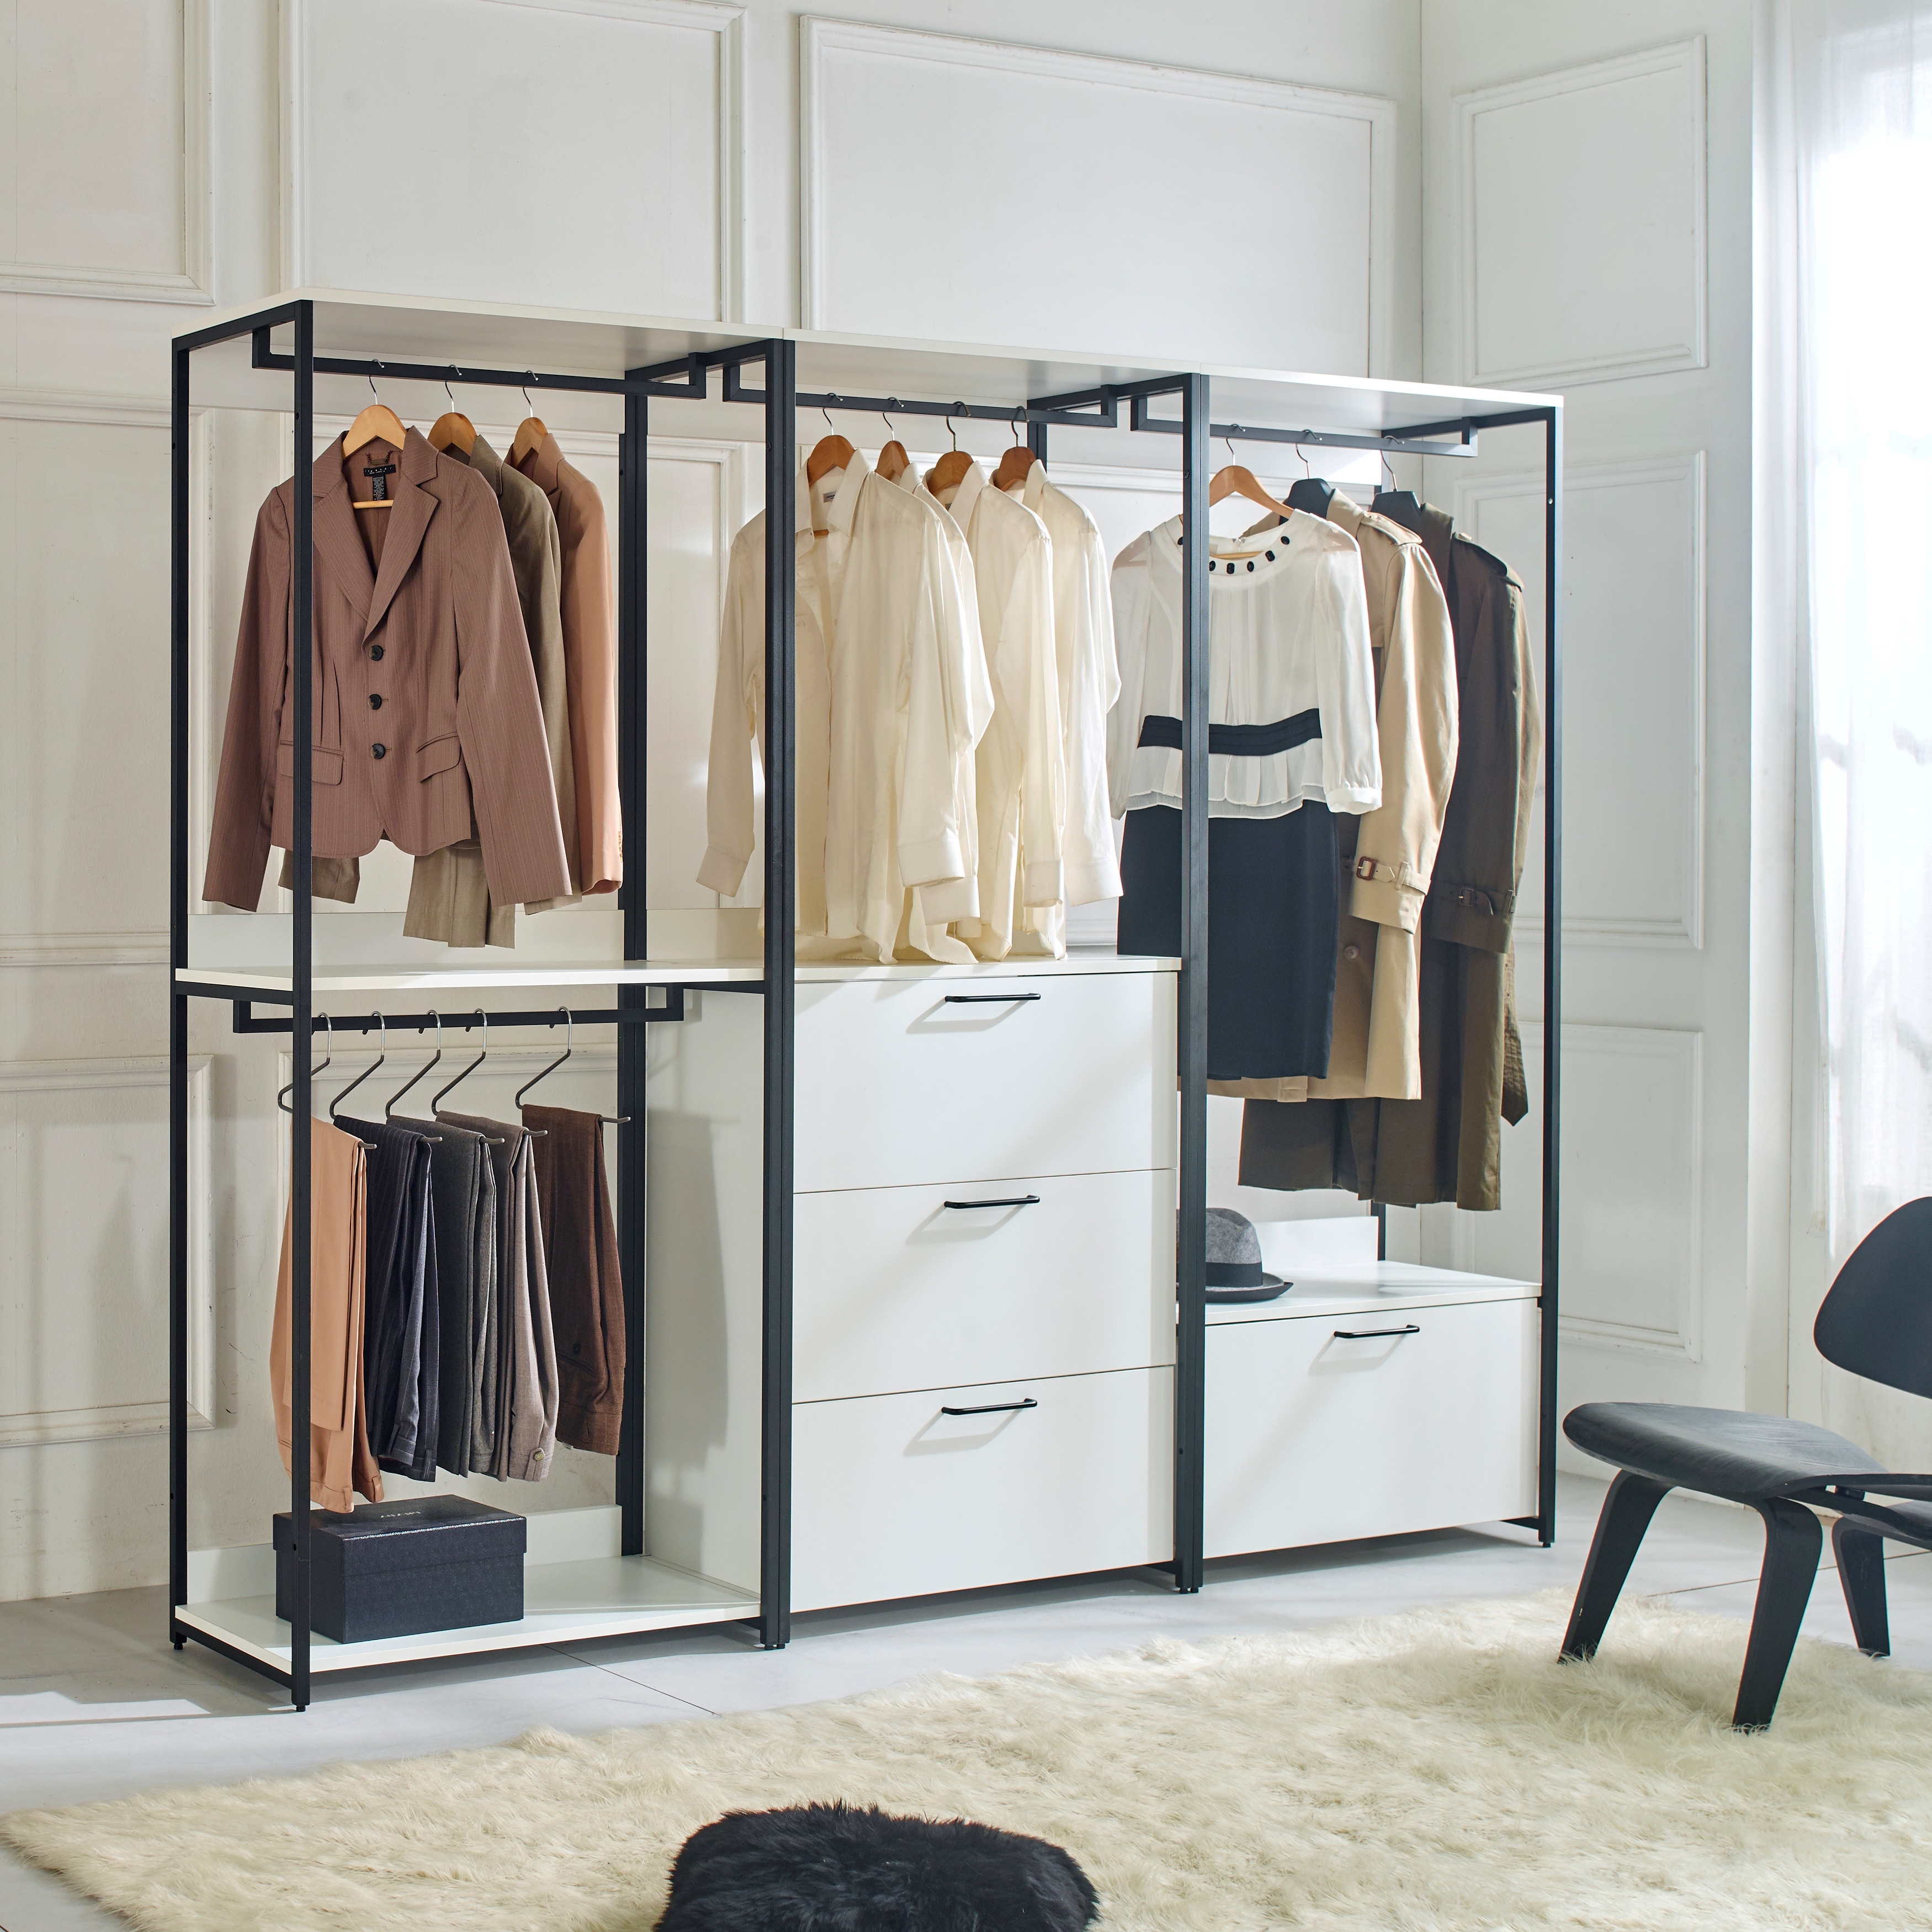 https://ak1.ostkcdn.com/images/products/is/images/direct/7660845f30b0c8e45989041f44232dafc234fb91/Garment-Rack-White-Freestanding-Walk-in-Wood-Closet-System-with-Metal-Frame-and-4-Drawer%2C-Bedroom-Clothing-Armoires.jpg